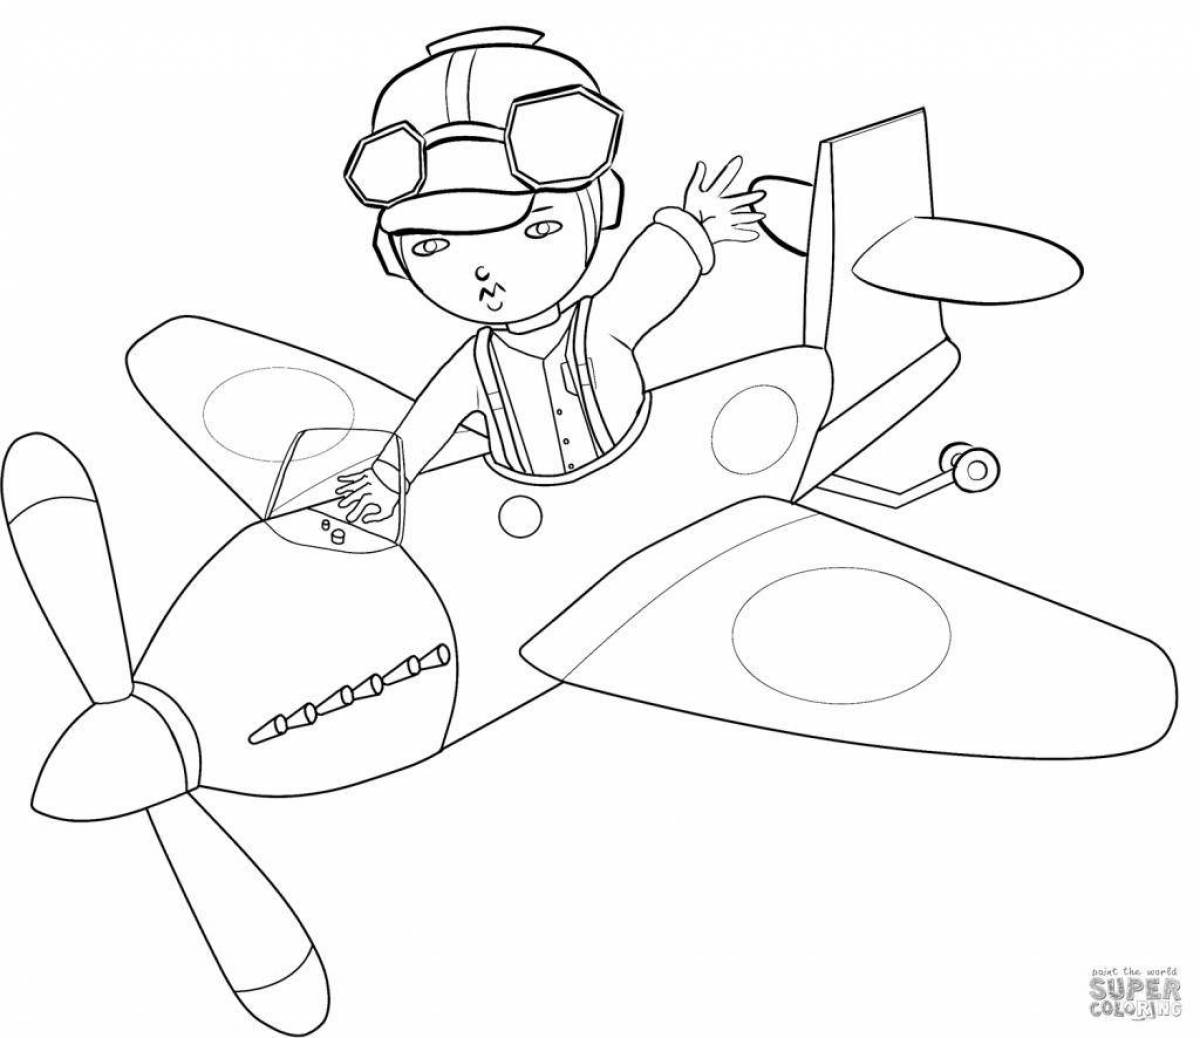 Majestic military pilot coloring book for kids